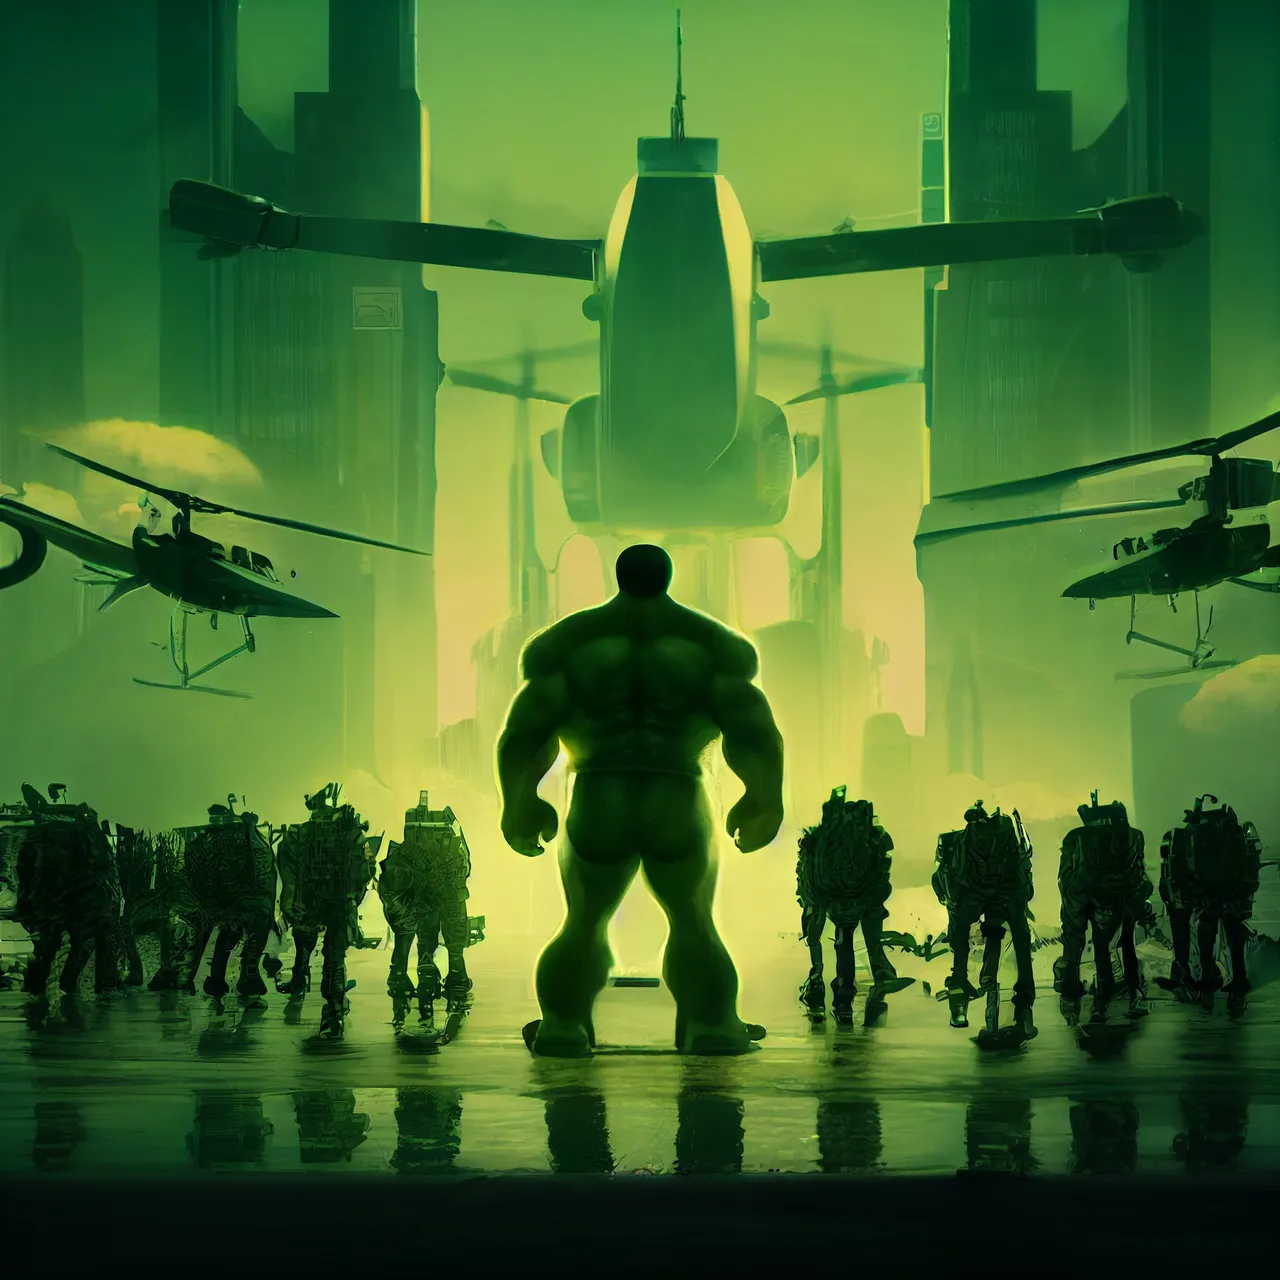 Ed_Privat_Baby_Hulk_standing_in_front_of_an_army_of_soldiers_wi_97653464-d8f3-4252-b881-0ad453ef5a93.png